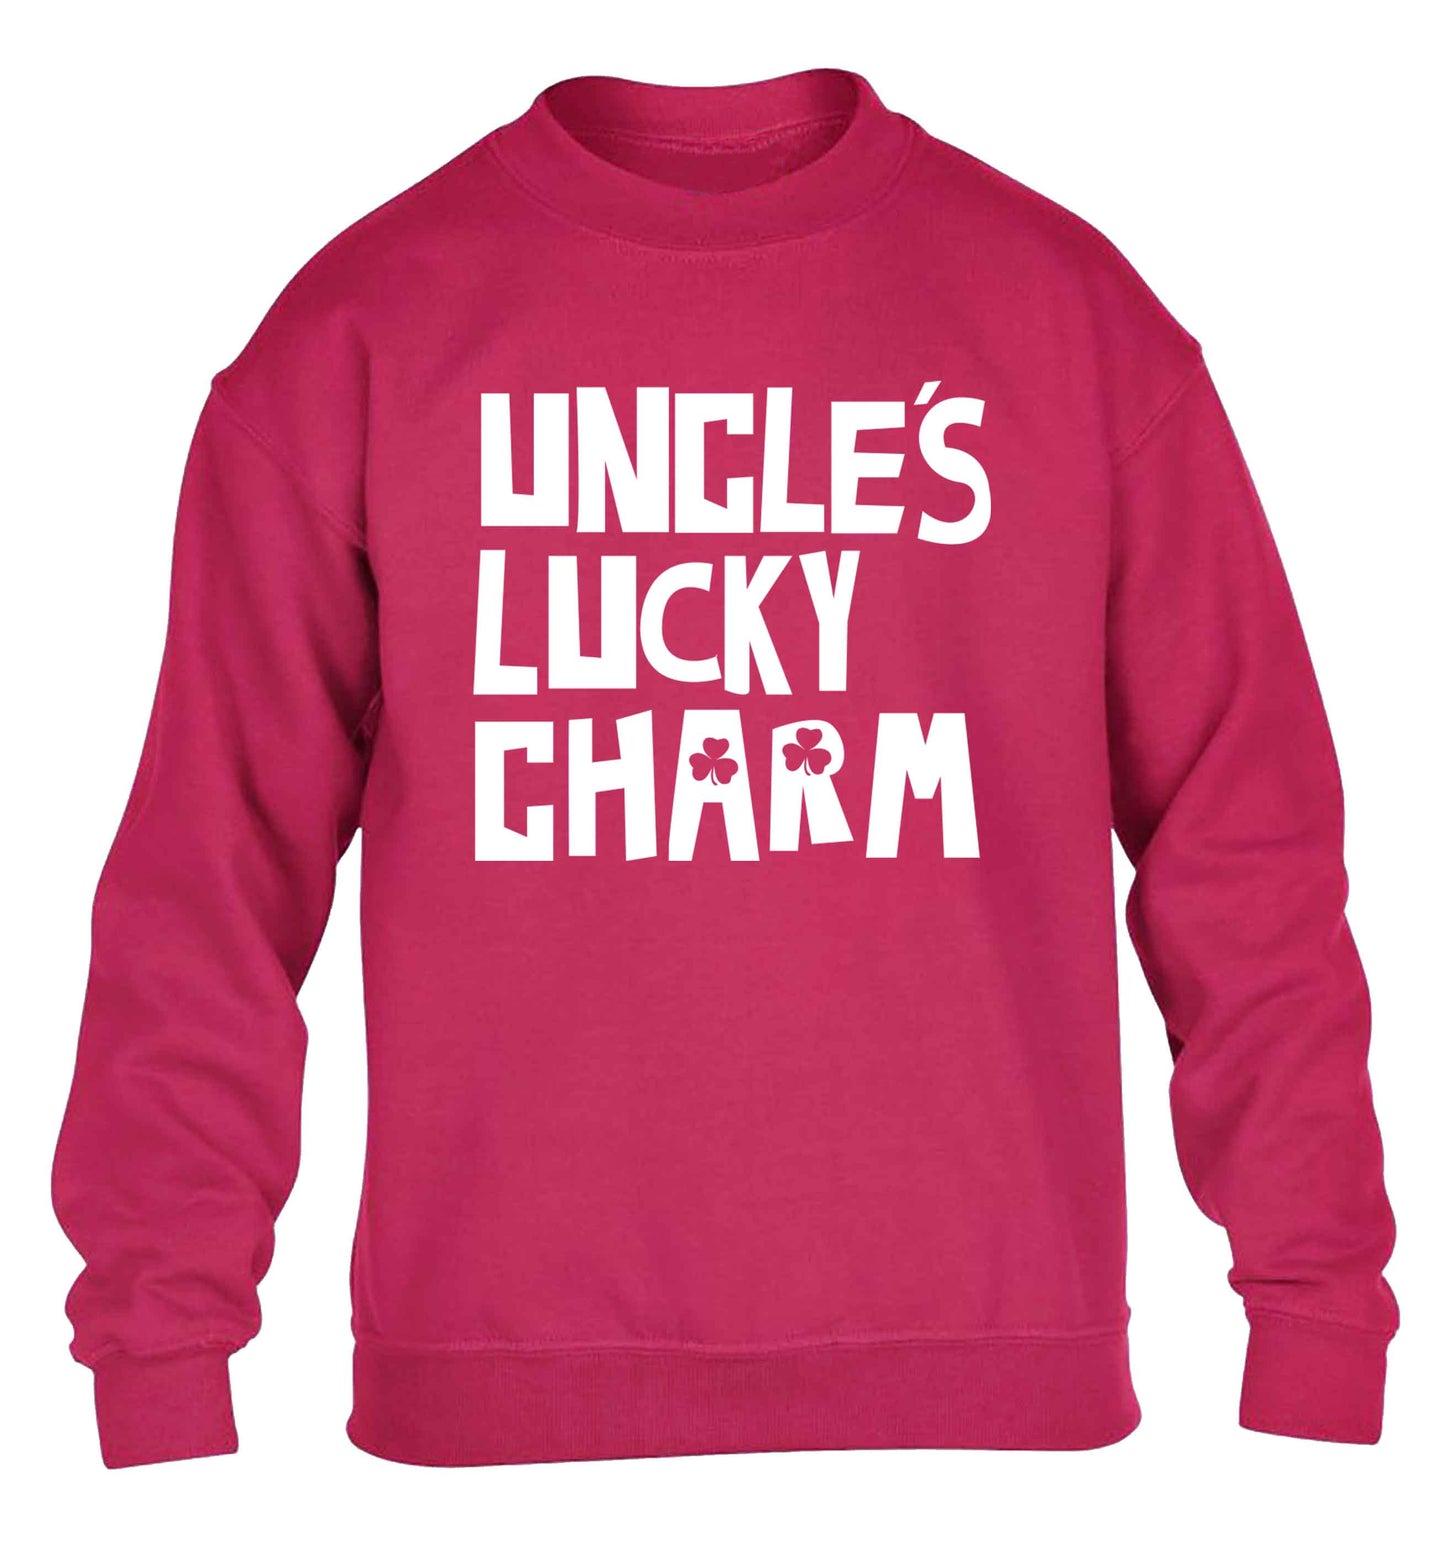 Uncles lucky charm children's pink sweater 12-13 Years